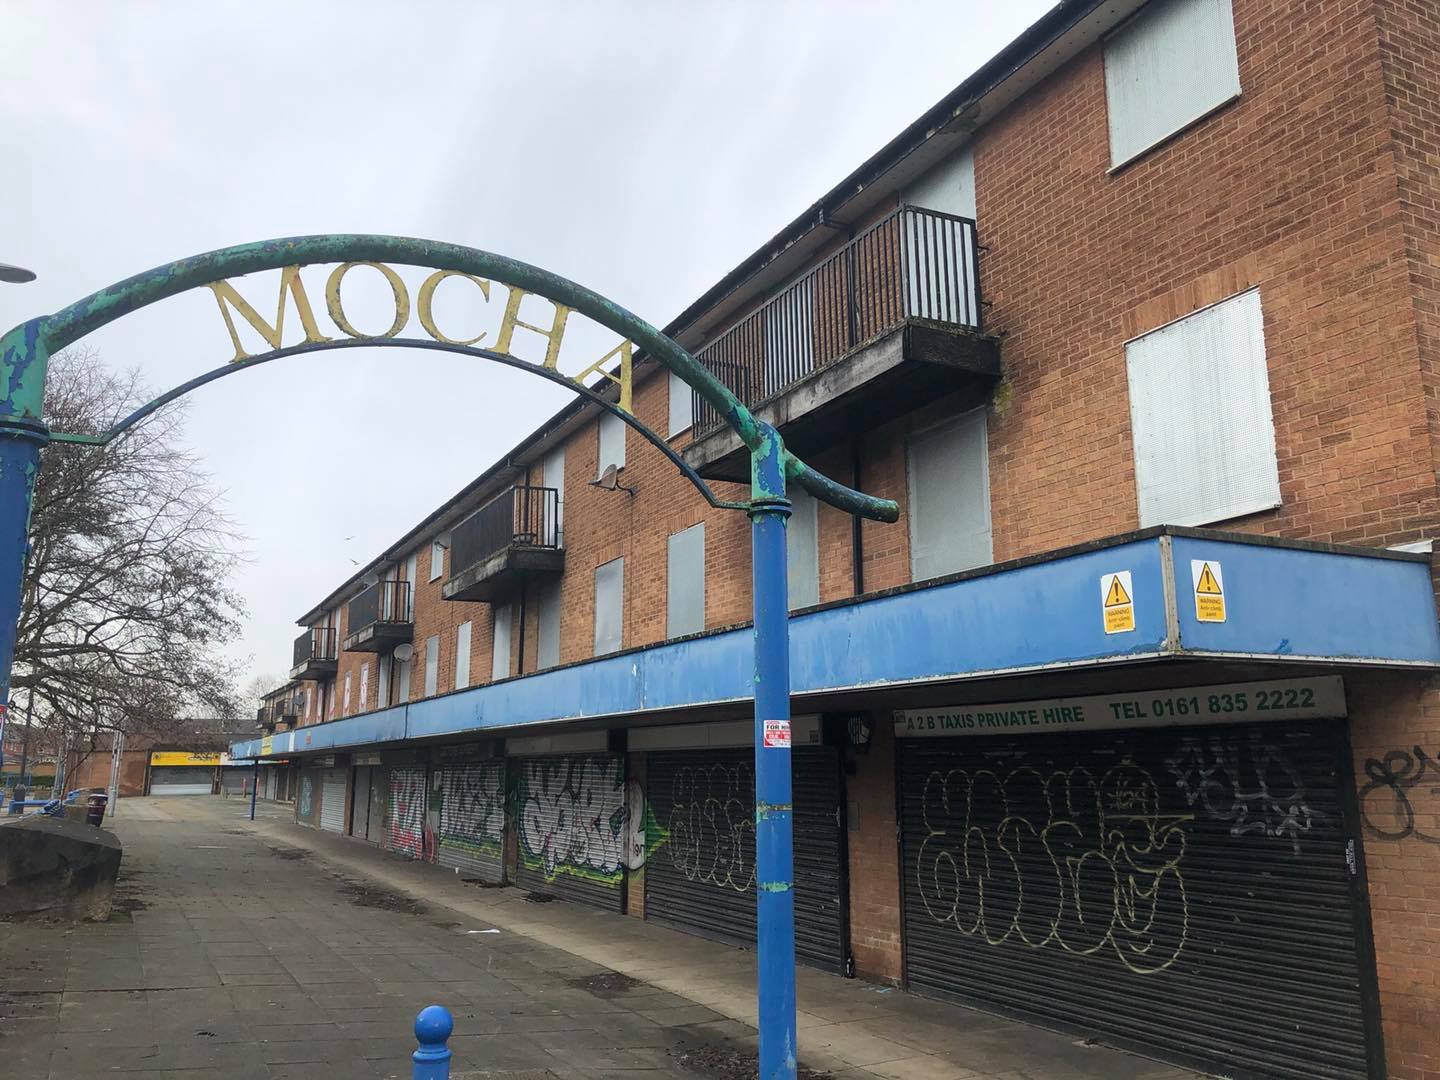 'It's like time stands still' - Hanky Park estate and Mocha Parade shops remembered in new video blog